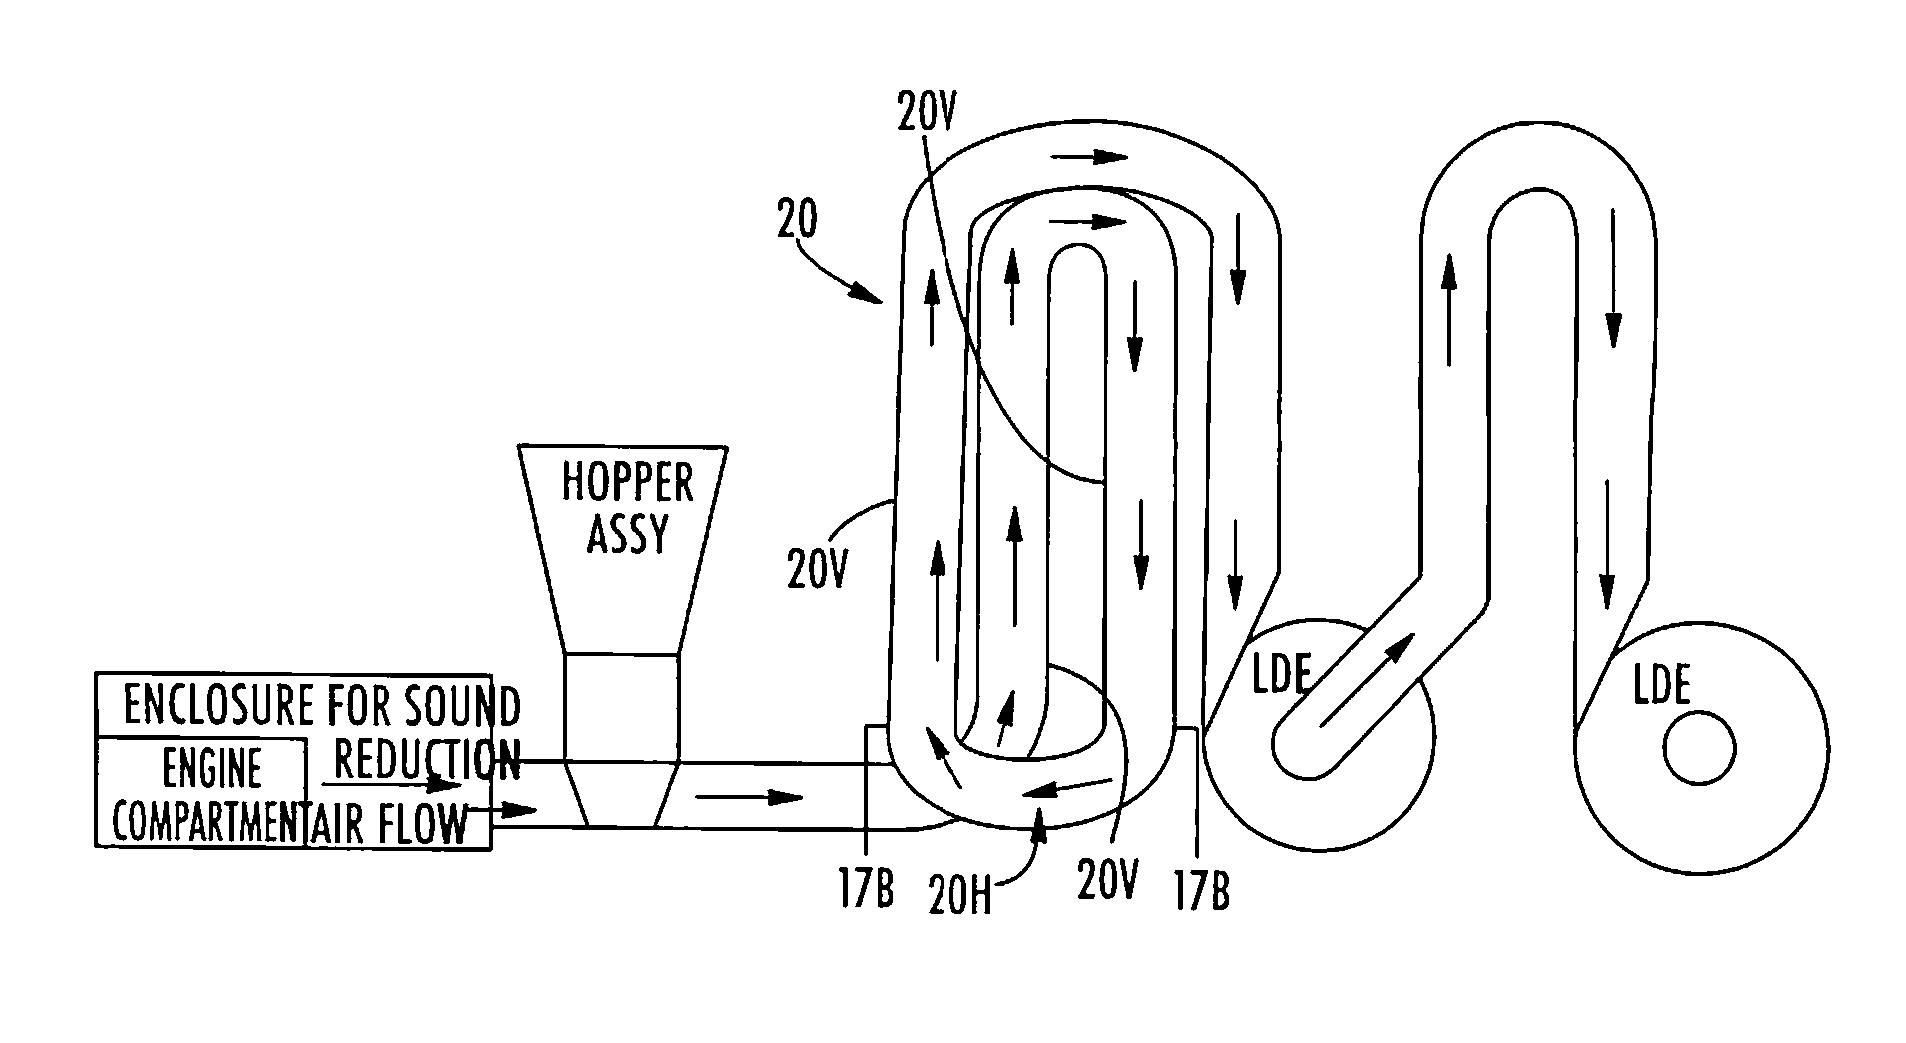 System and Method Employing Turbofan Jet Engine for Drying Bulk Materials